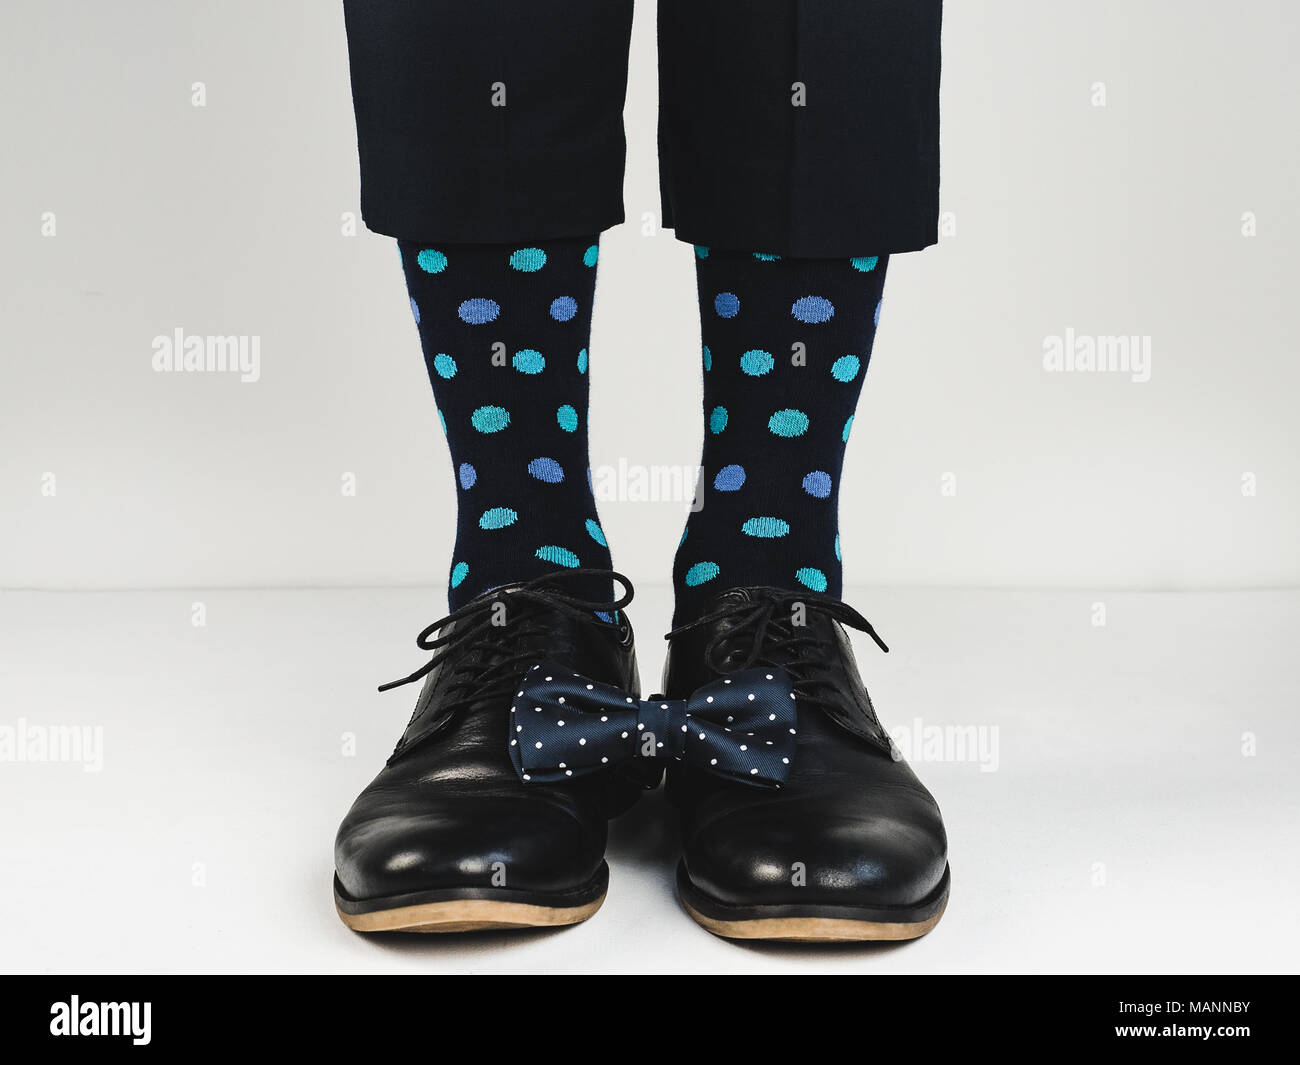 Stylish shoes, bright socks and bow tie Stock Photo - Alamy